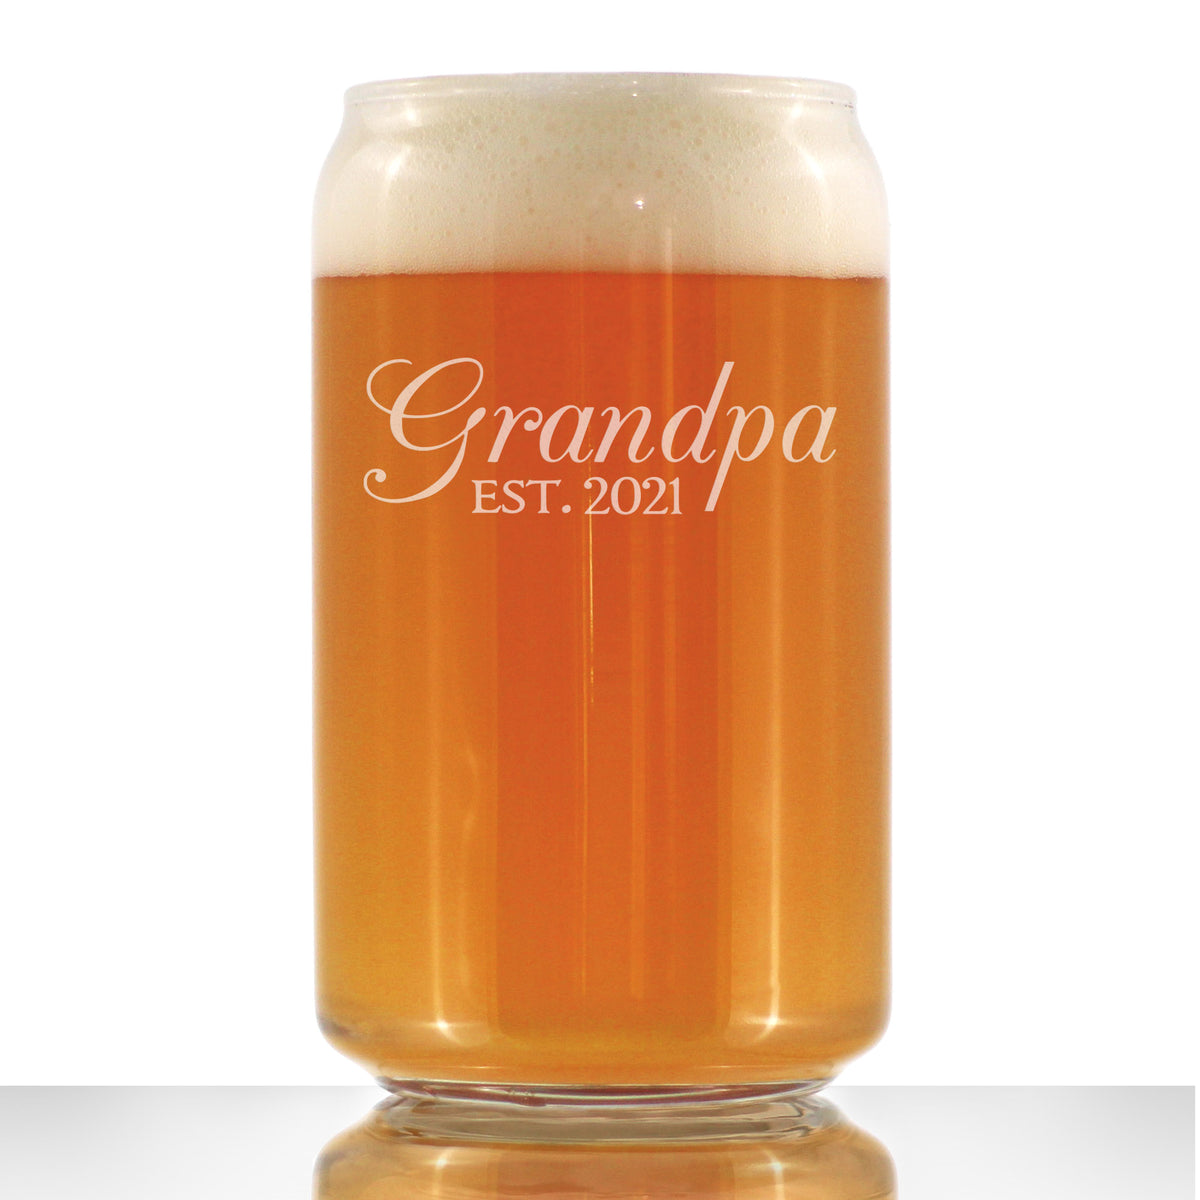 Grandpa Est 2021 - New Grandfather Beer Can Pint Glass Gift for First Time Grandparents - Decorative 16 Oz Glasses